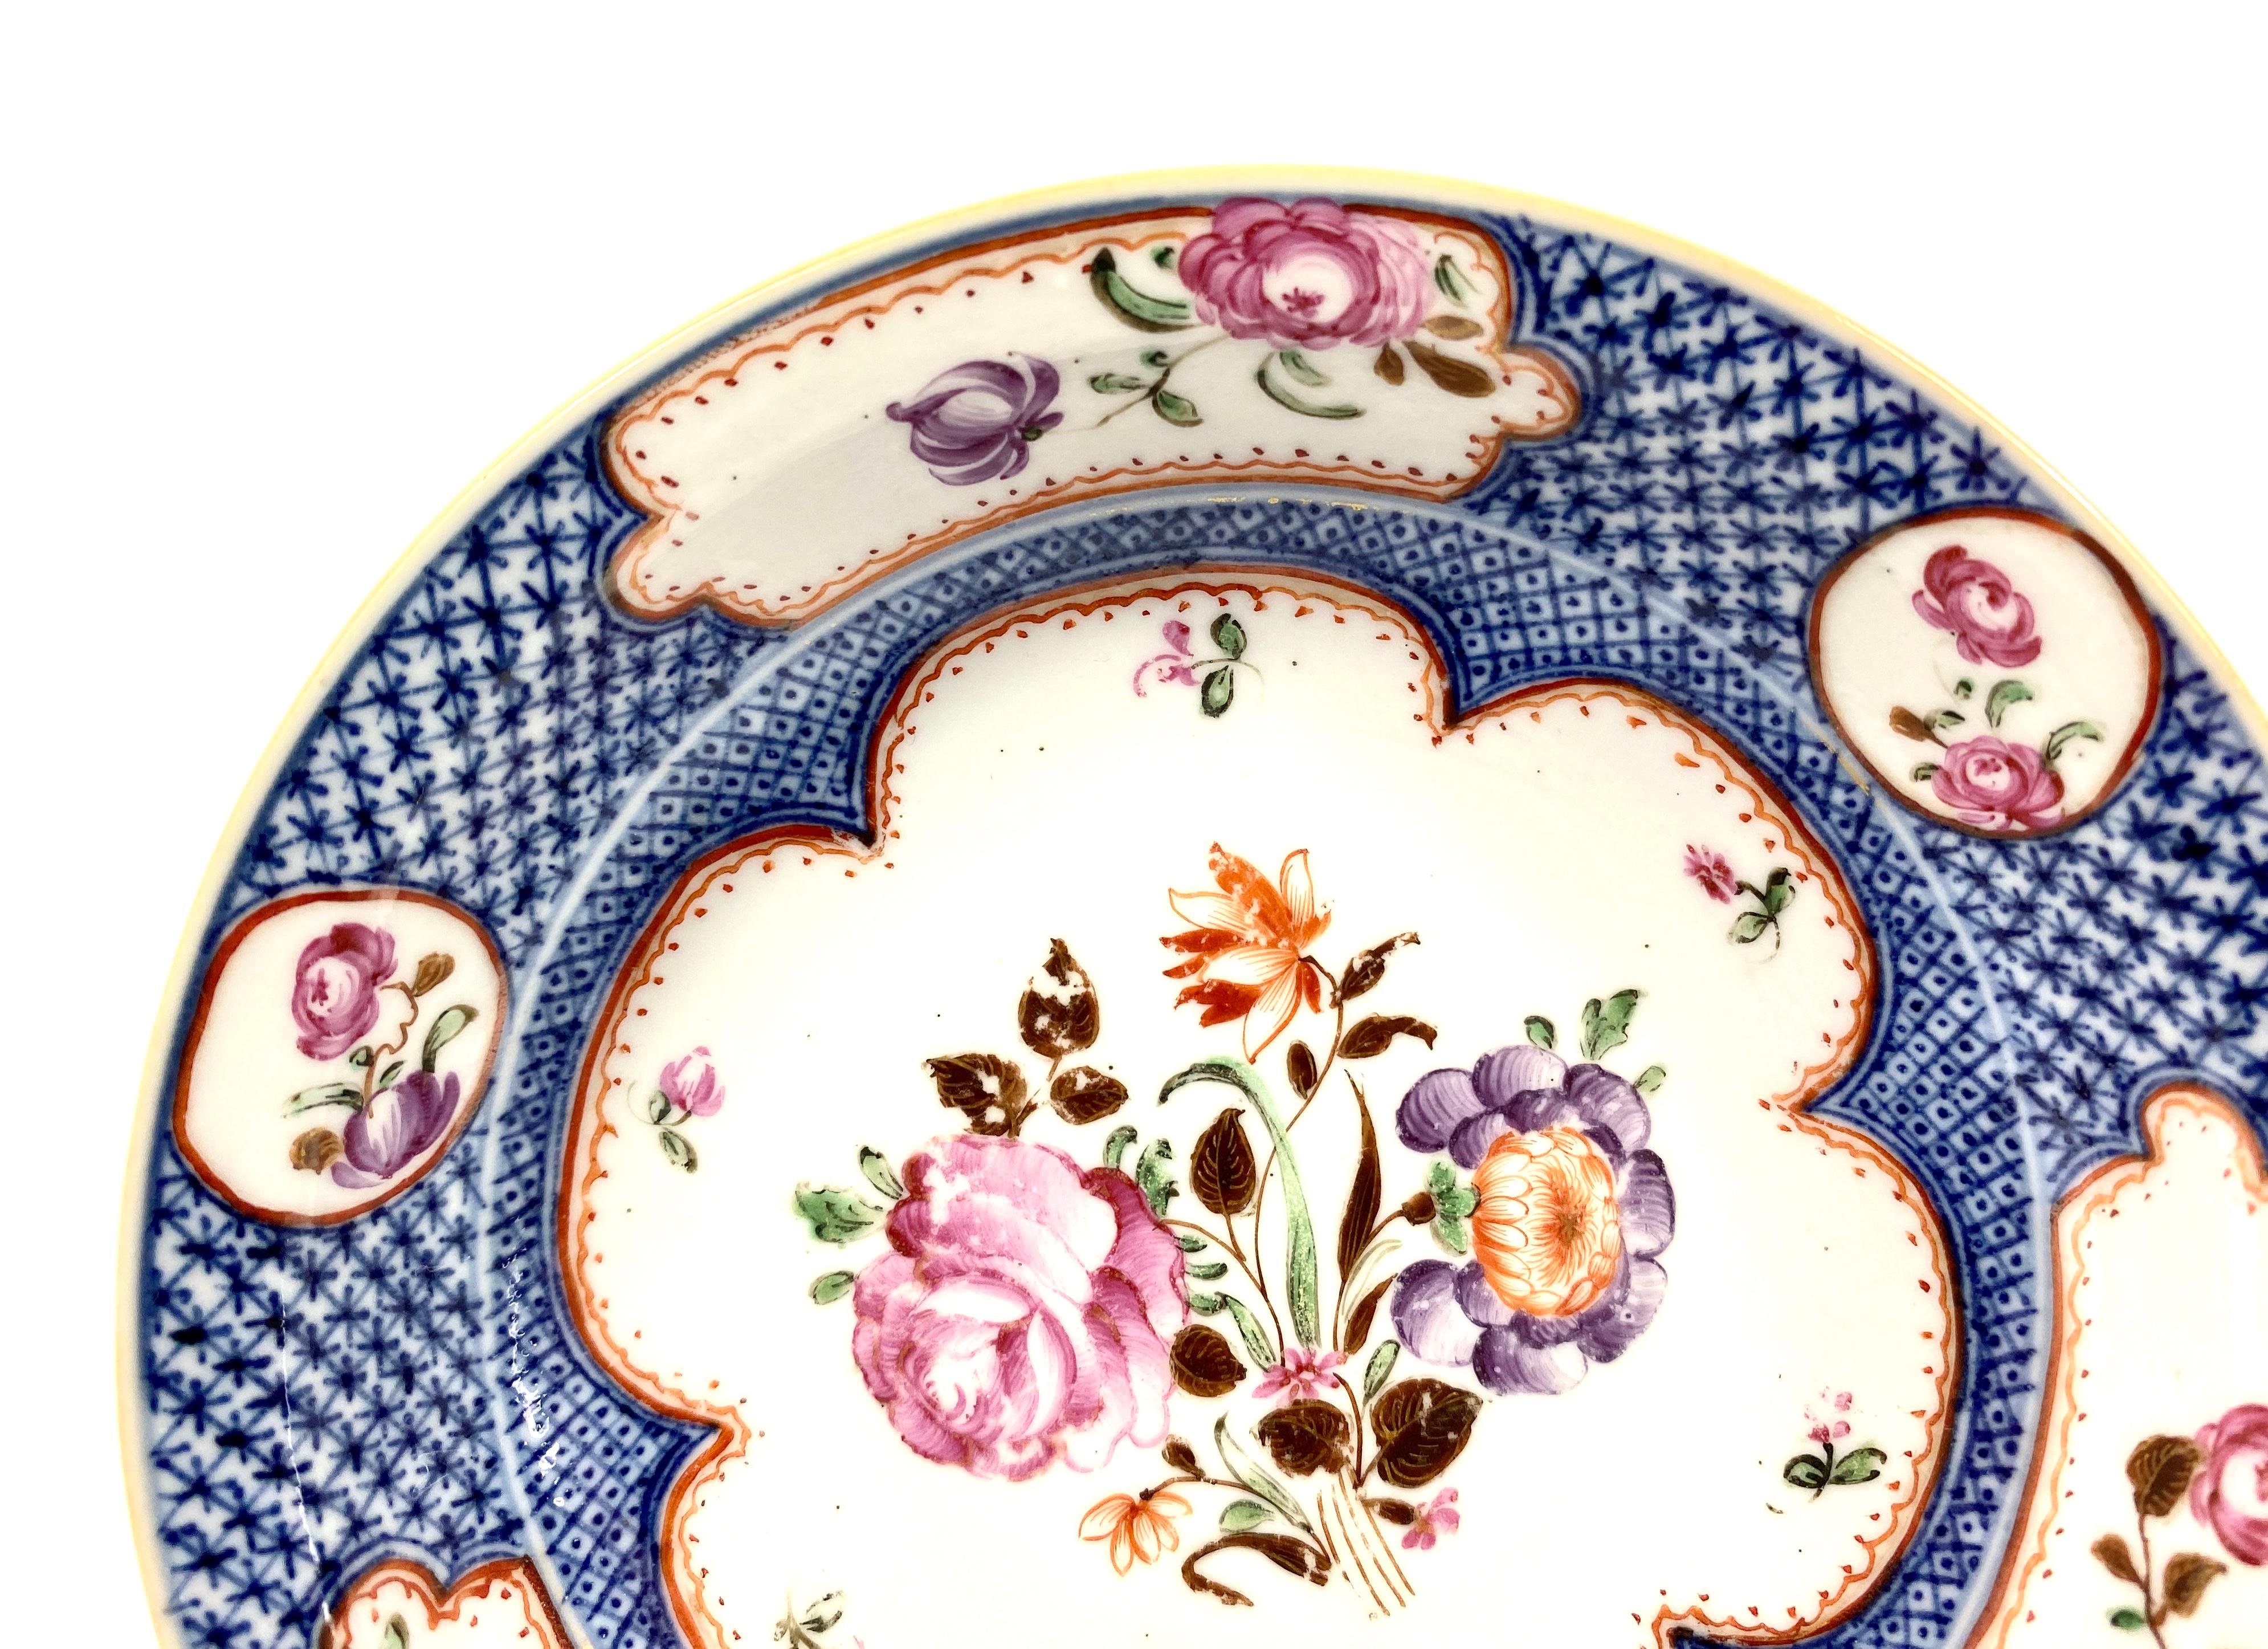 Chinese Export Pair of Chinese Porcelain Dishes, Compagnie des Indes circa 1760 Qianlong Period